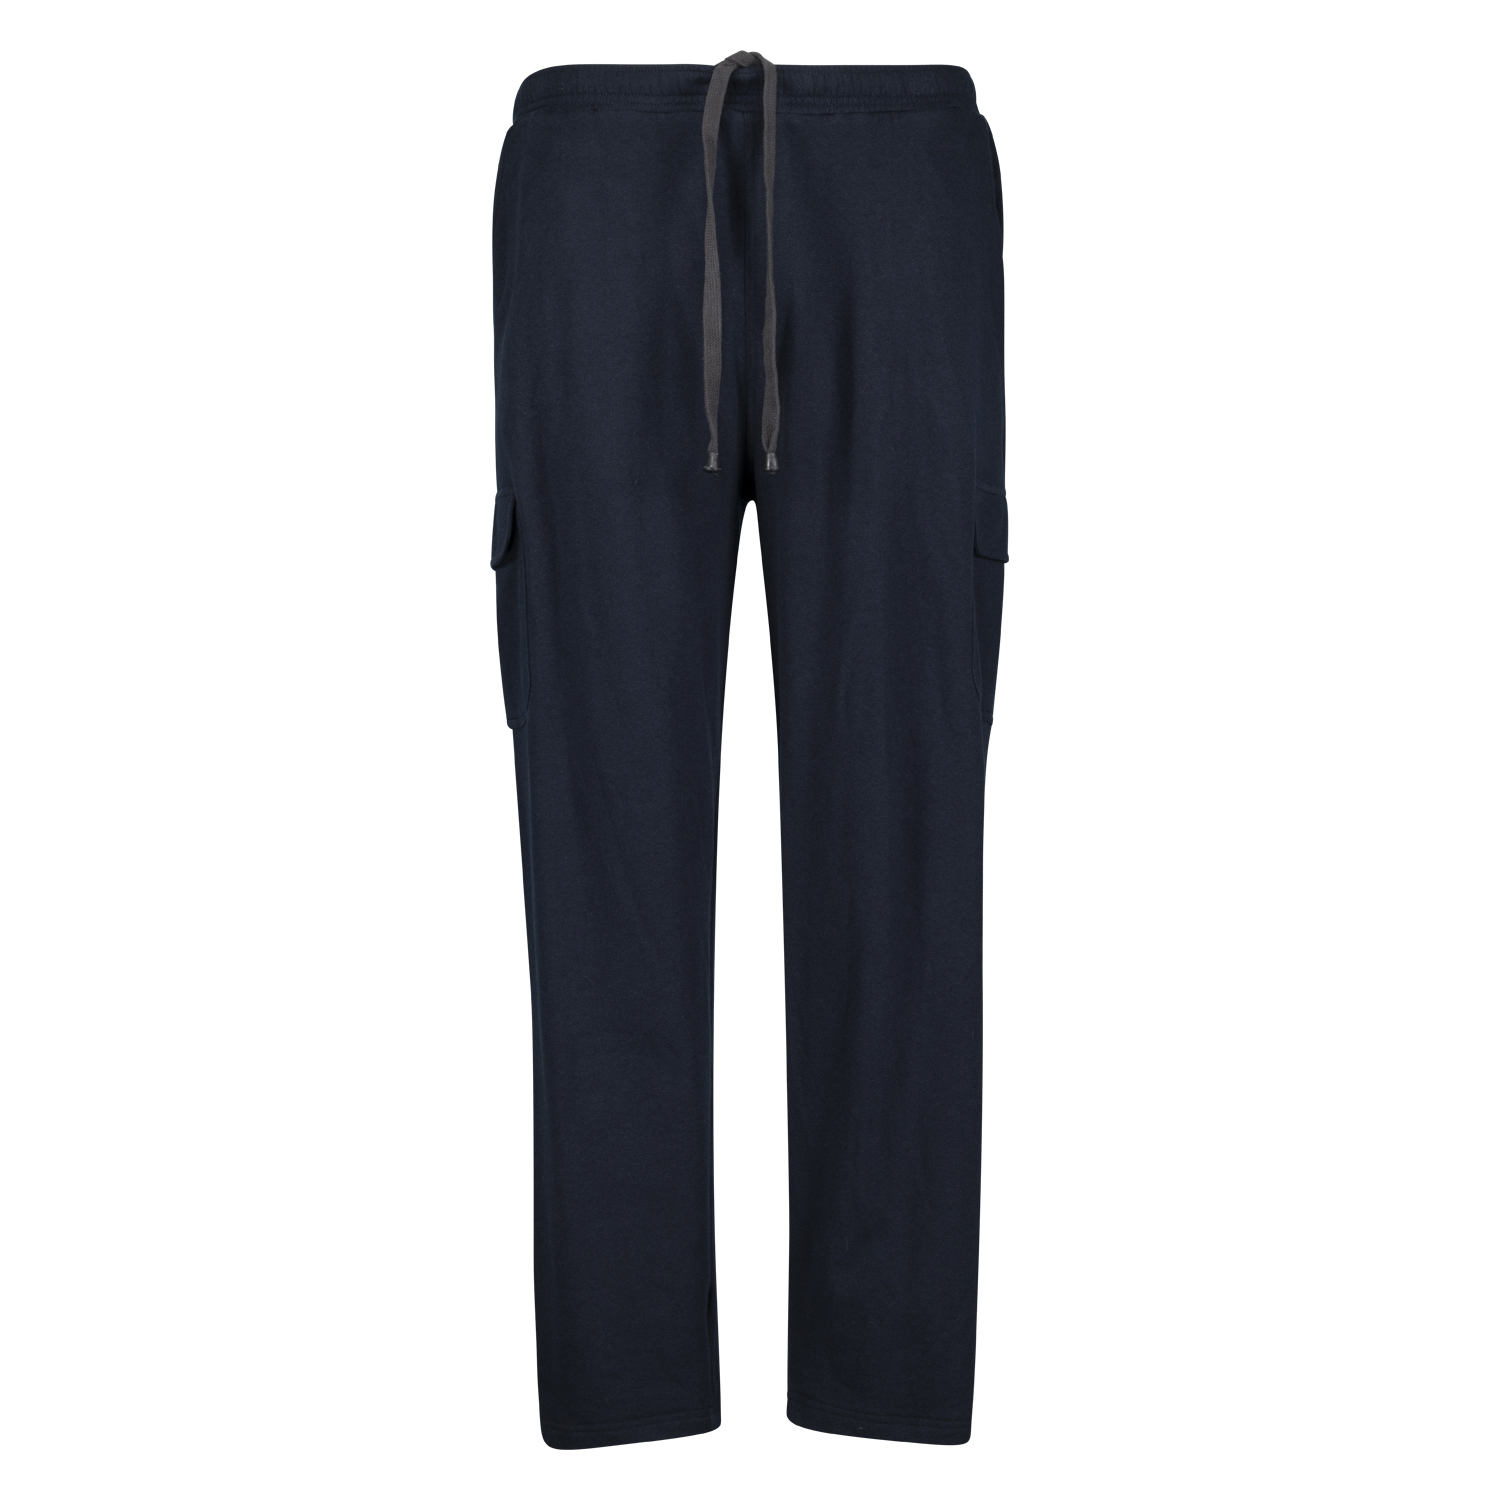 Cargo jogging pants in navy for men by Adamo series "Athen" in oversizes up to 14XL